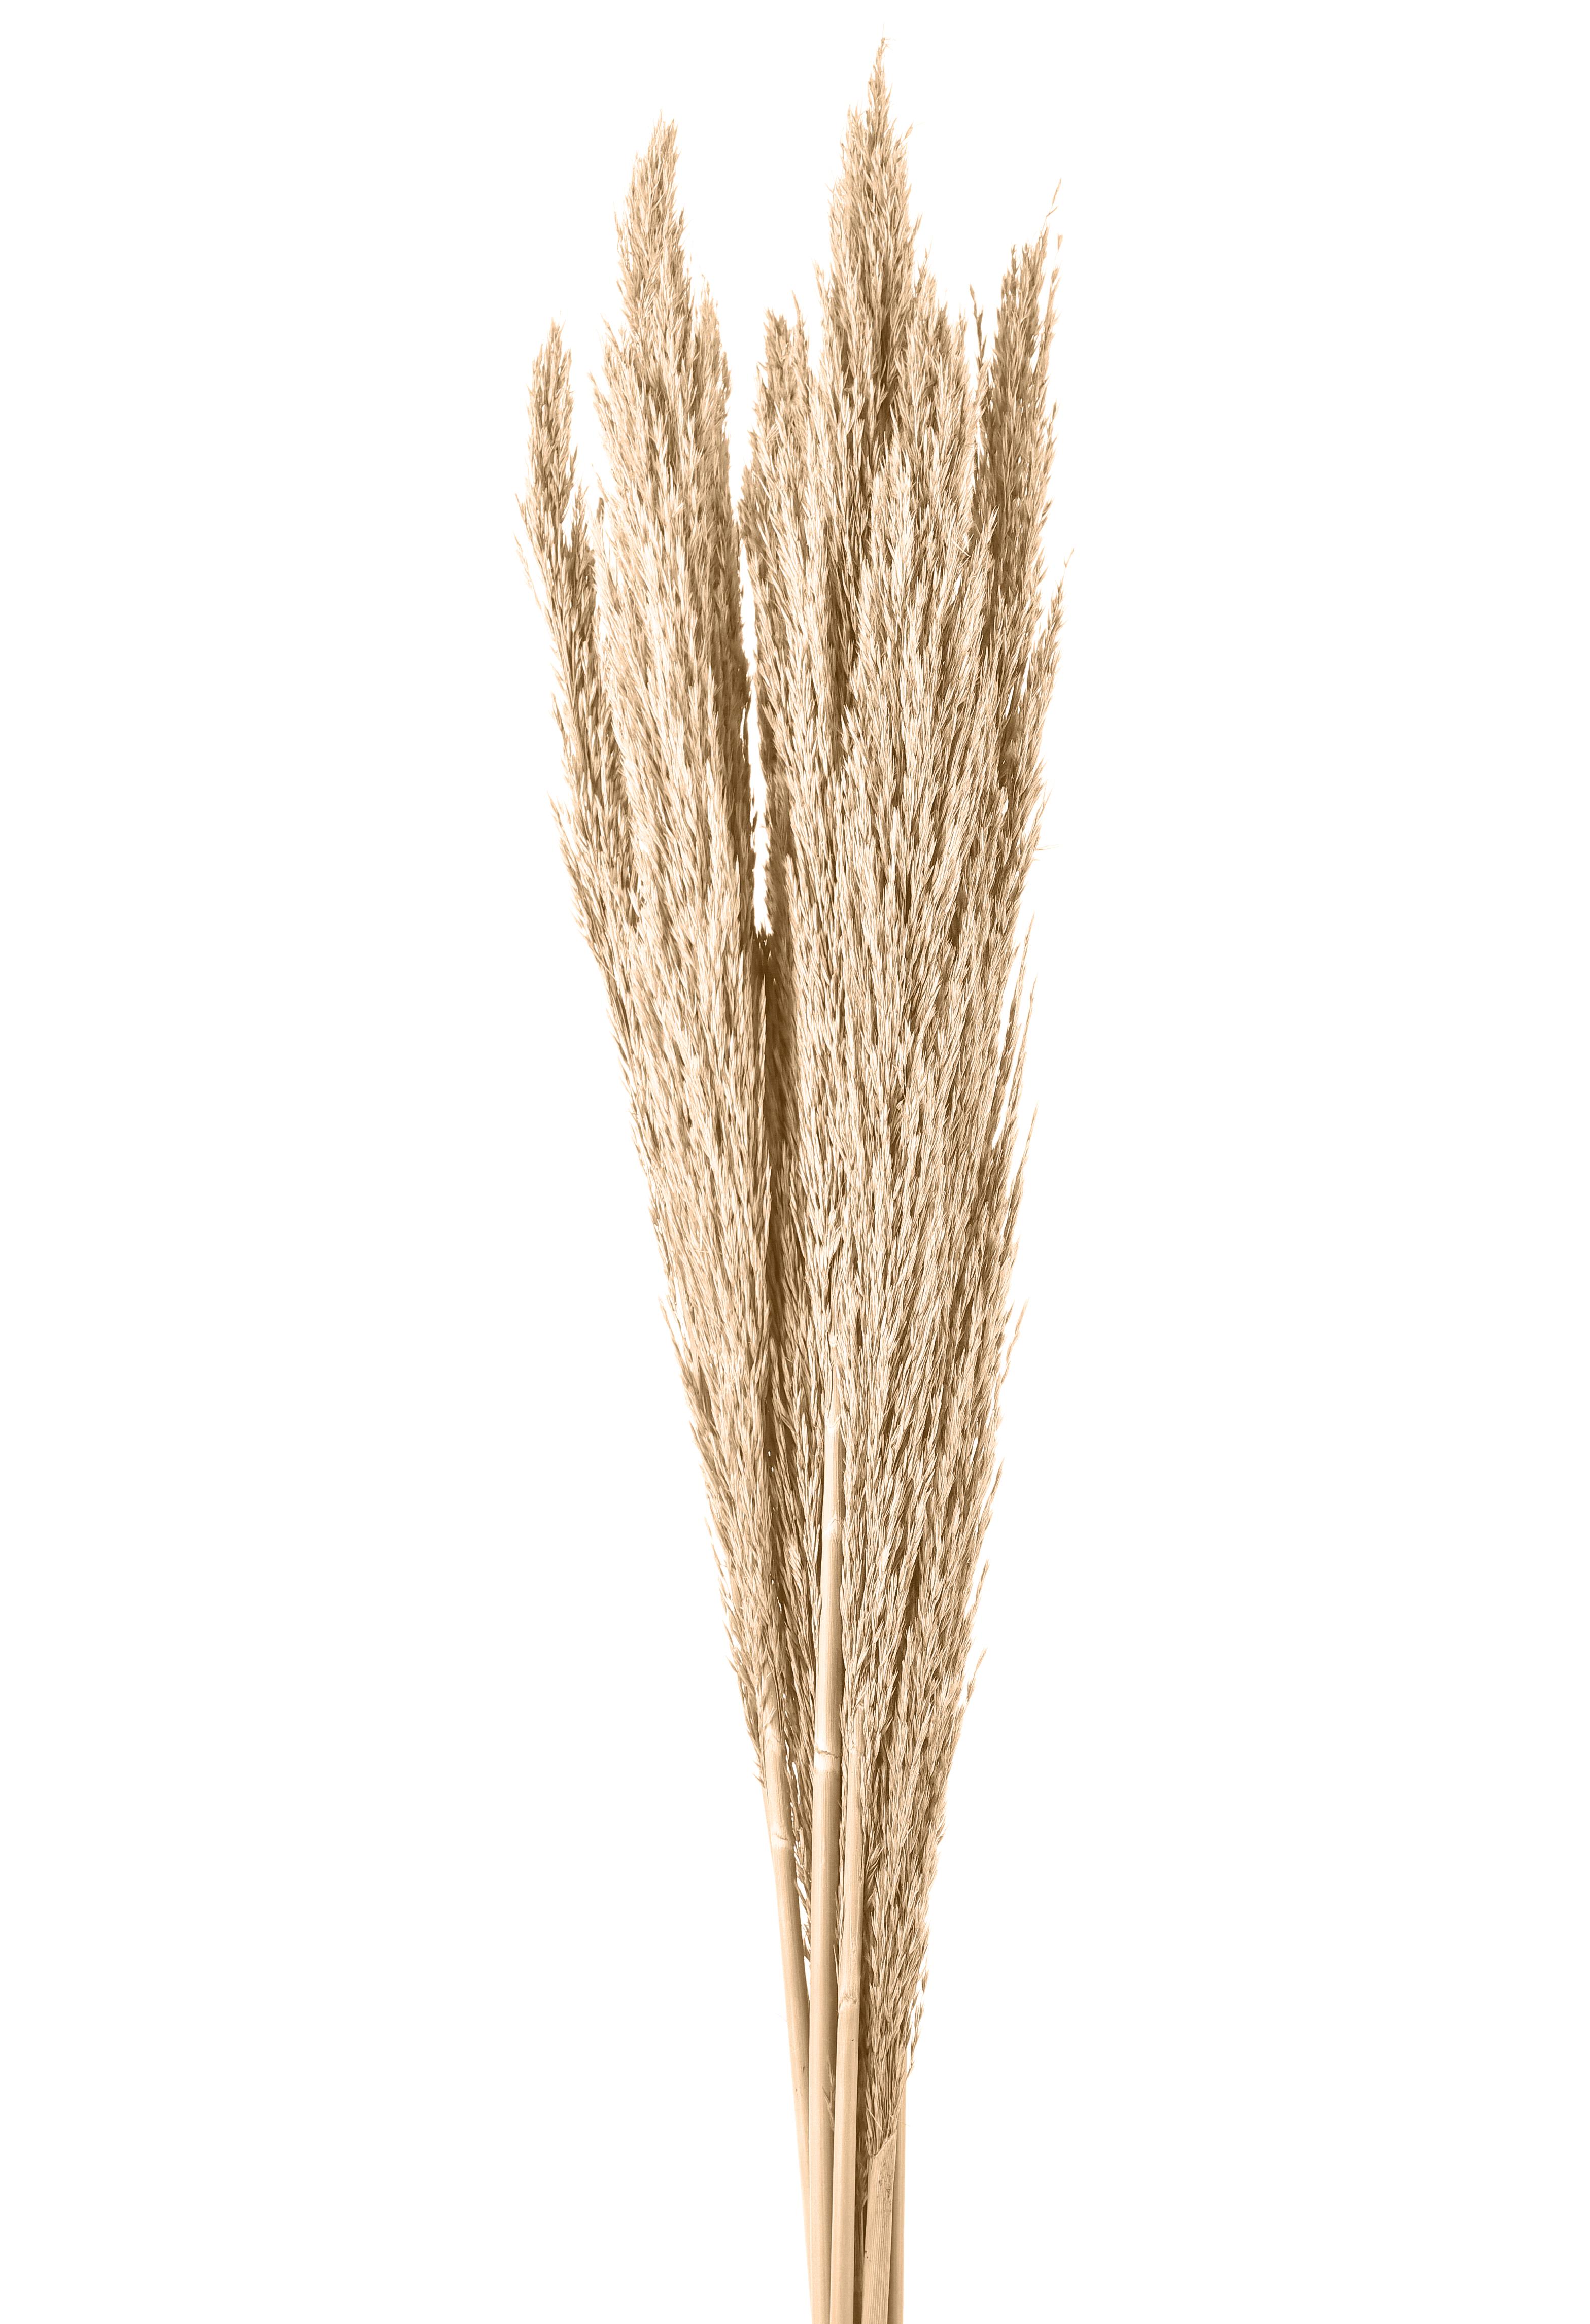 NATURAL PRODUCTS DRIED FLOWERS AND ERBS, COLORED GRASS AND FLOWERS, PIUME CANNE PALUDE 10 PZ 115 CM SBIANC